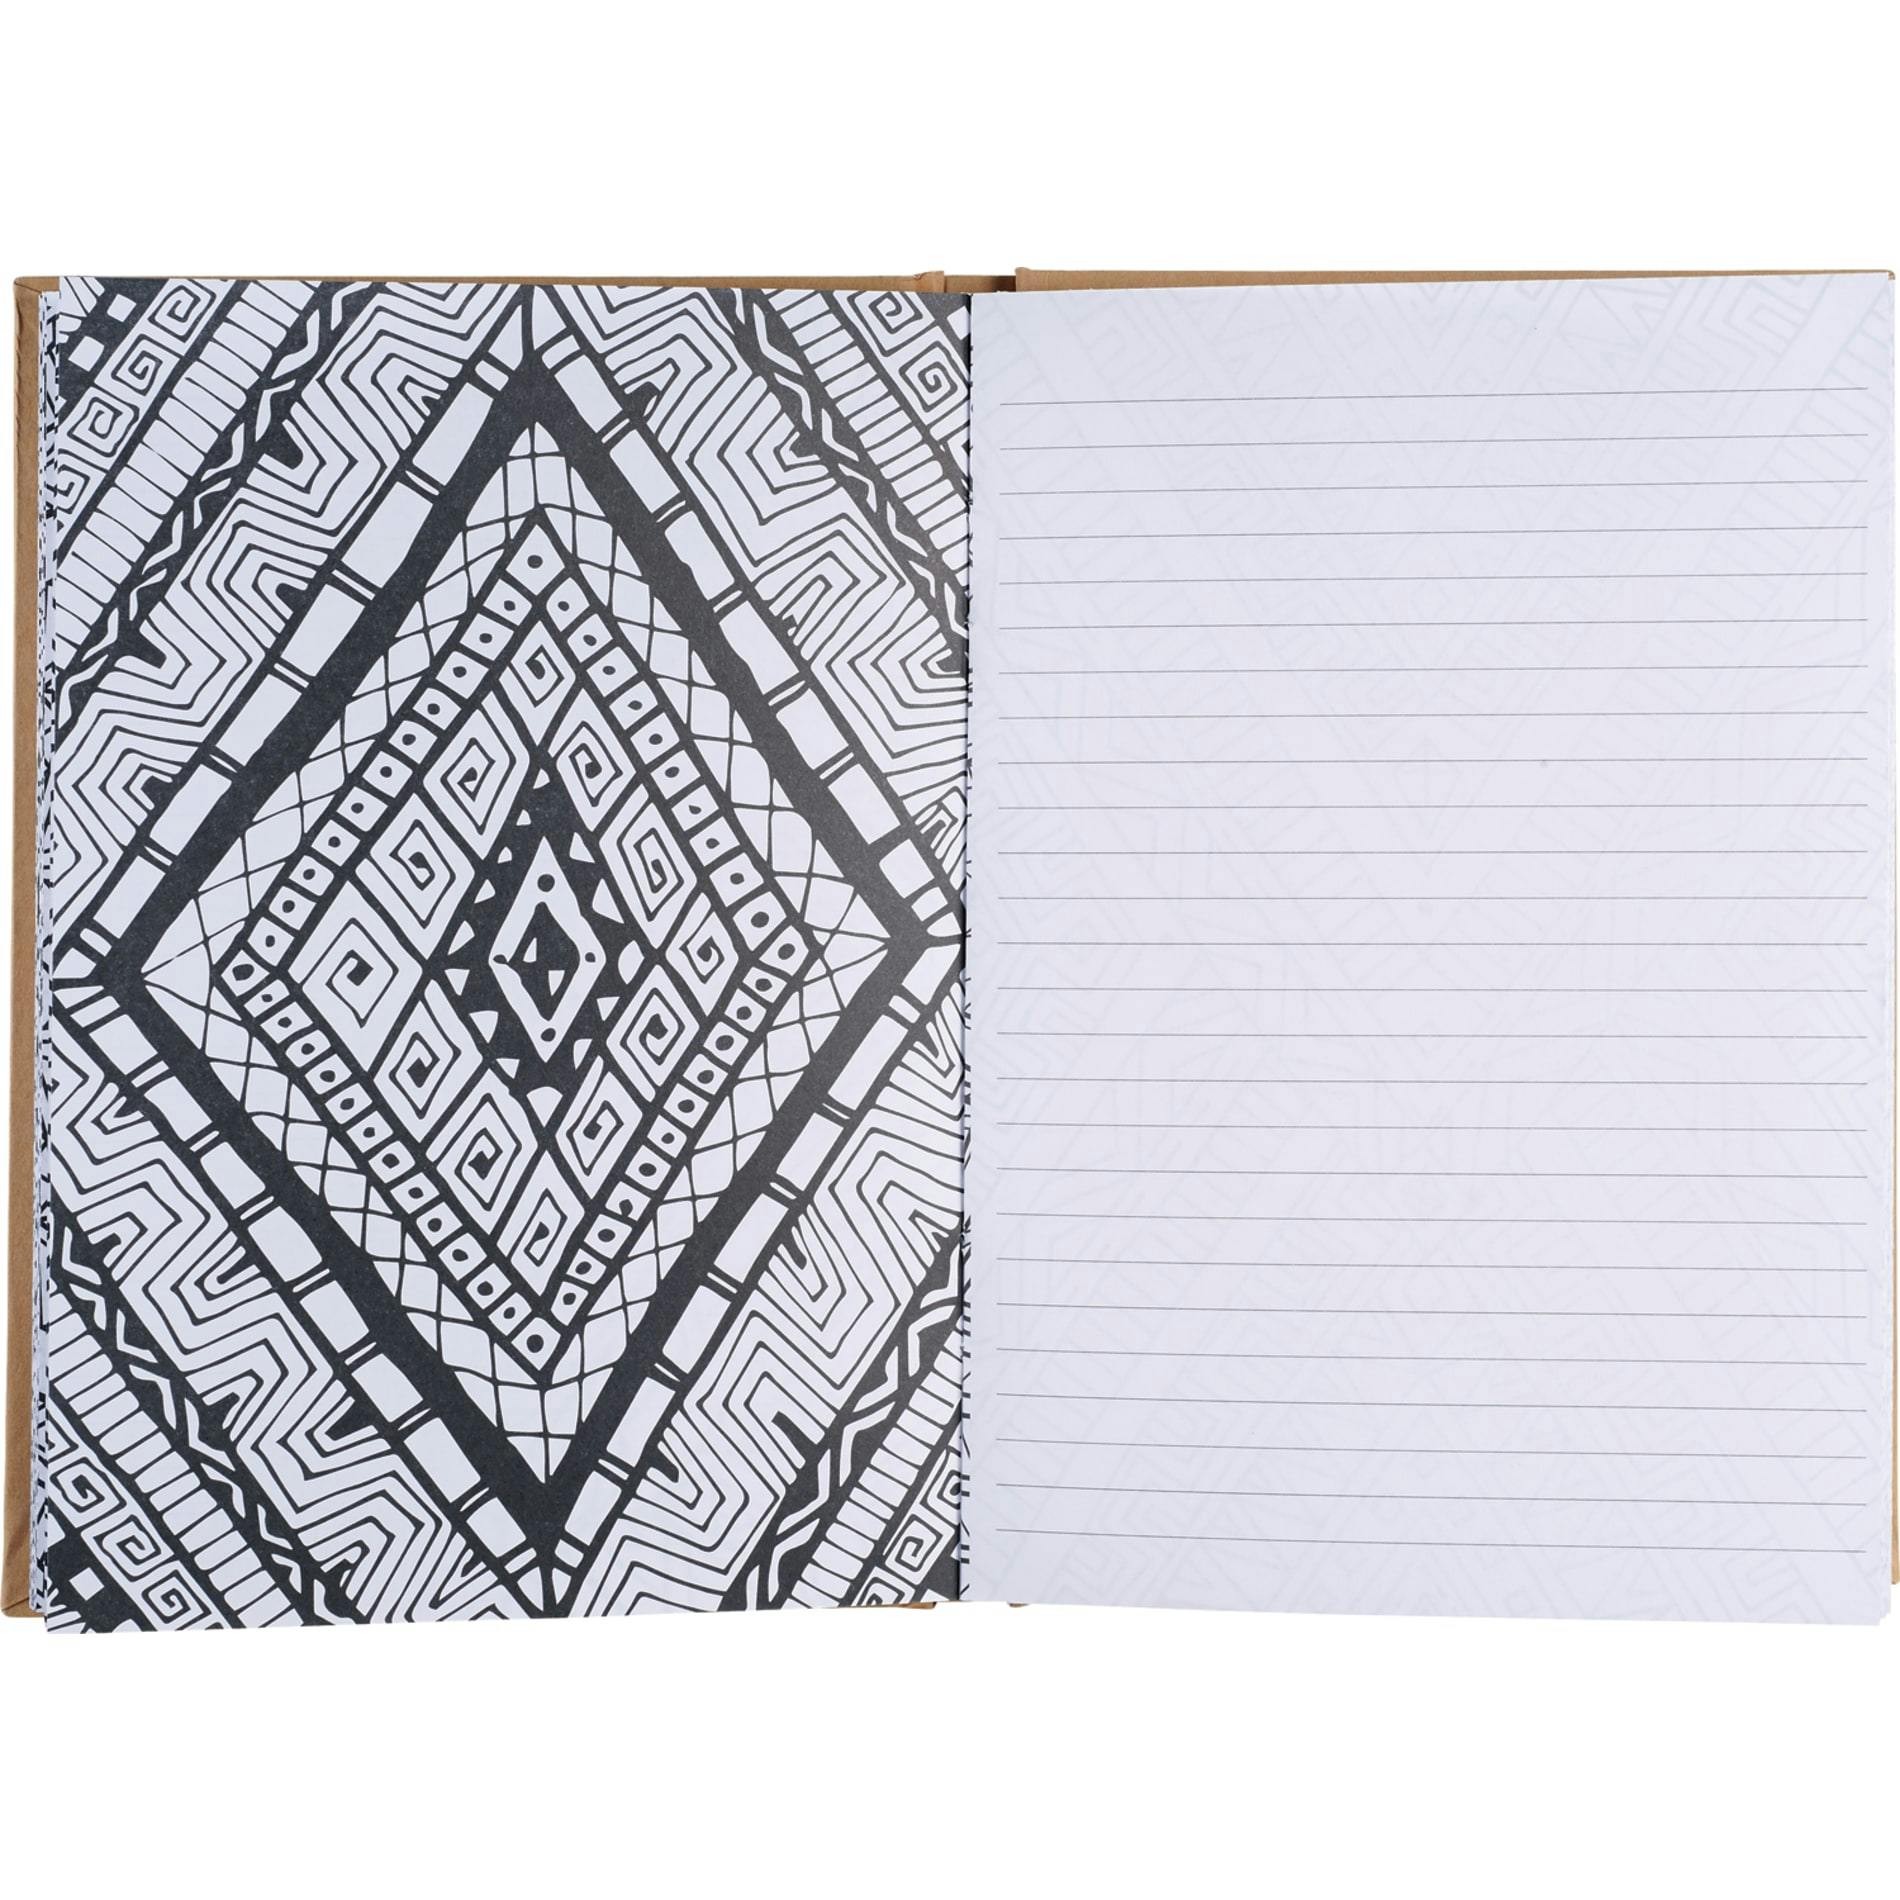 8" x 8.5" Doodle Adult Coloring Notebook - Large - additional Image 1